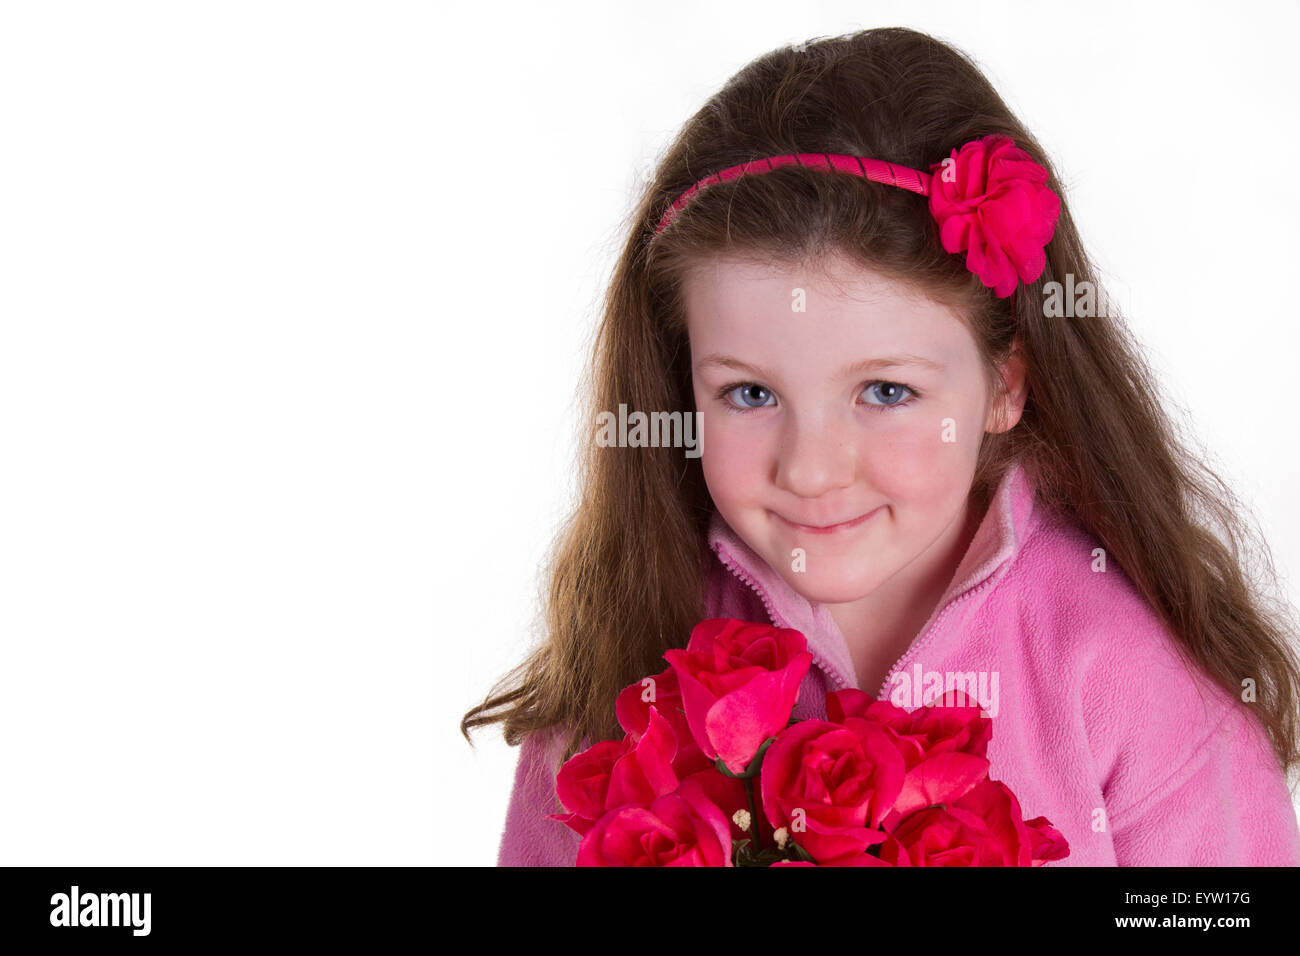 Young girl holding a bunch of artificial roses and looking at the camera Stock Photo